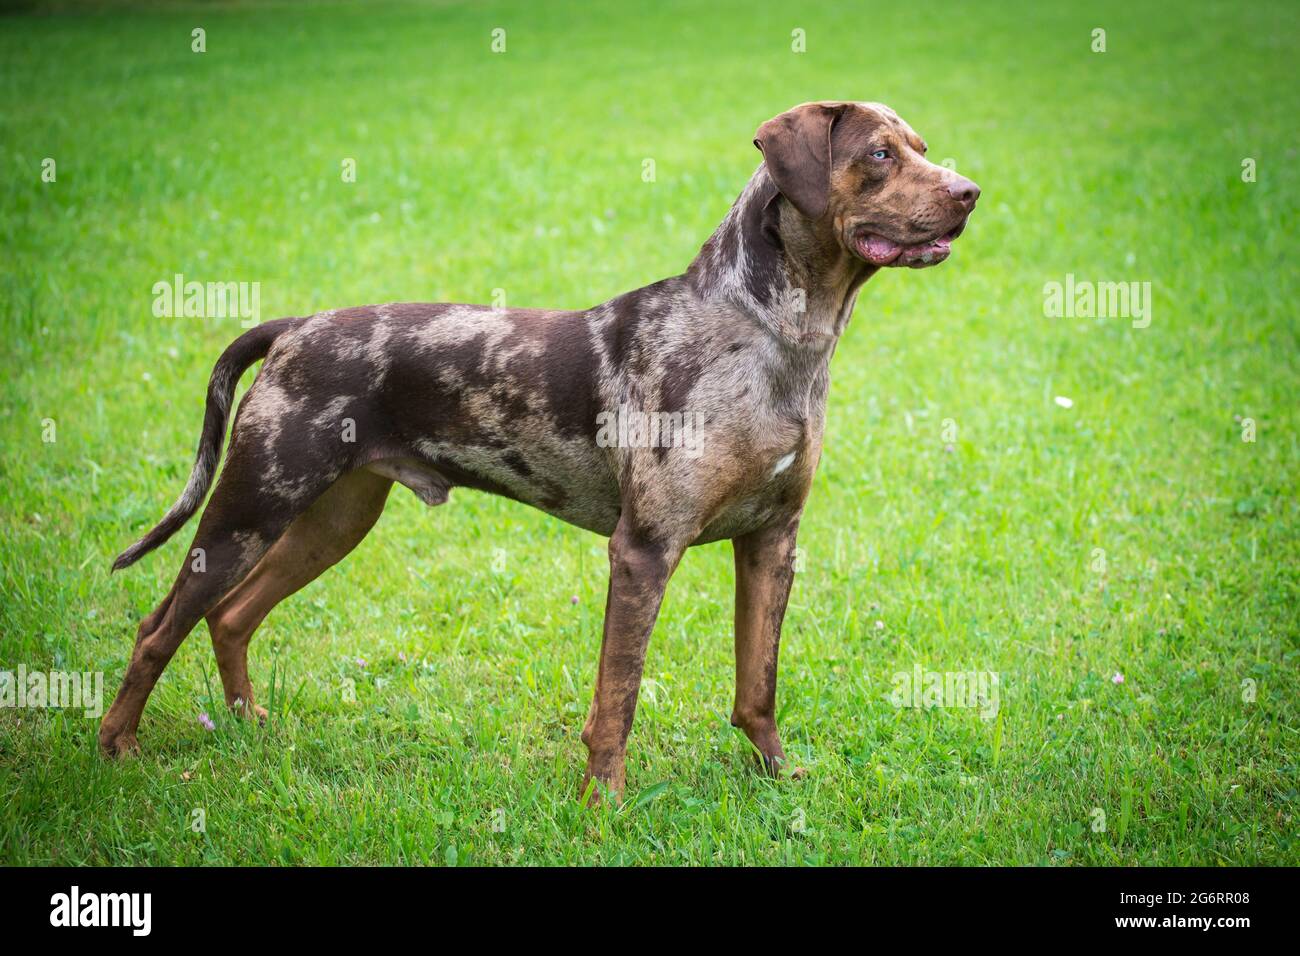 does rawhide dissolve in a catahoula leopard dogs stomach